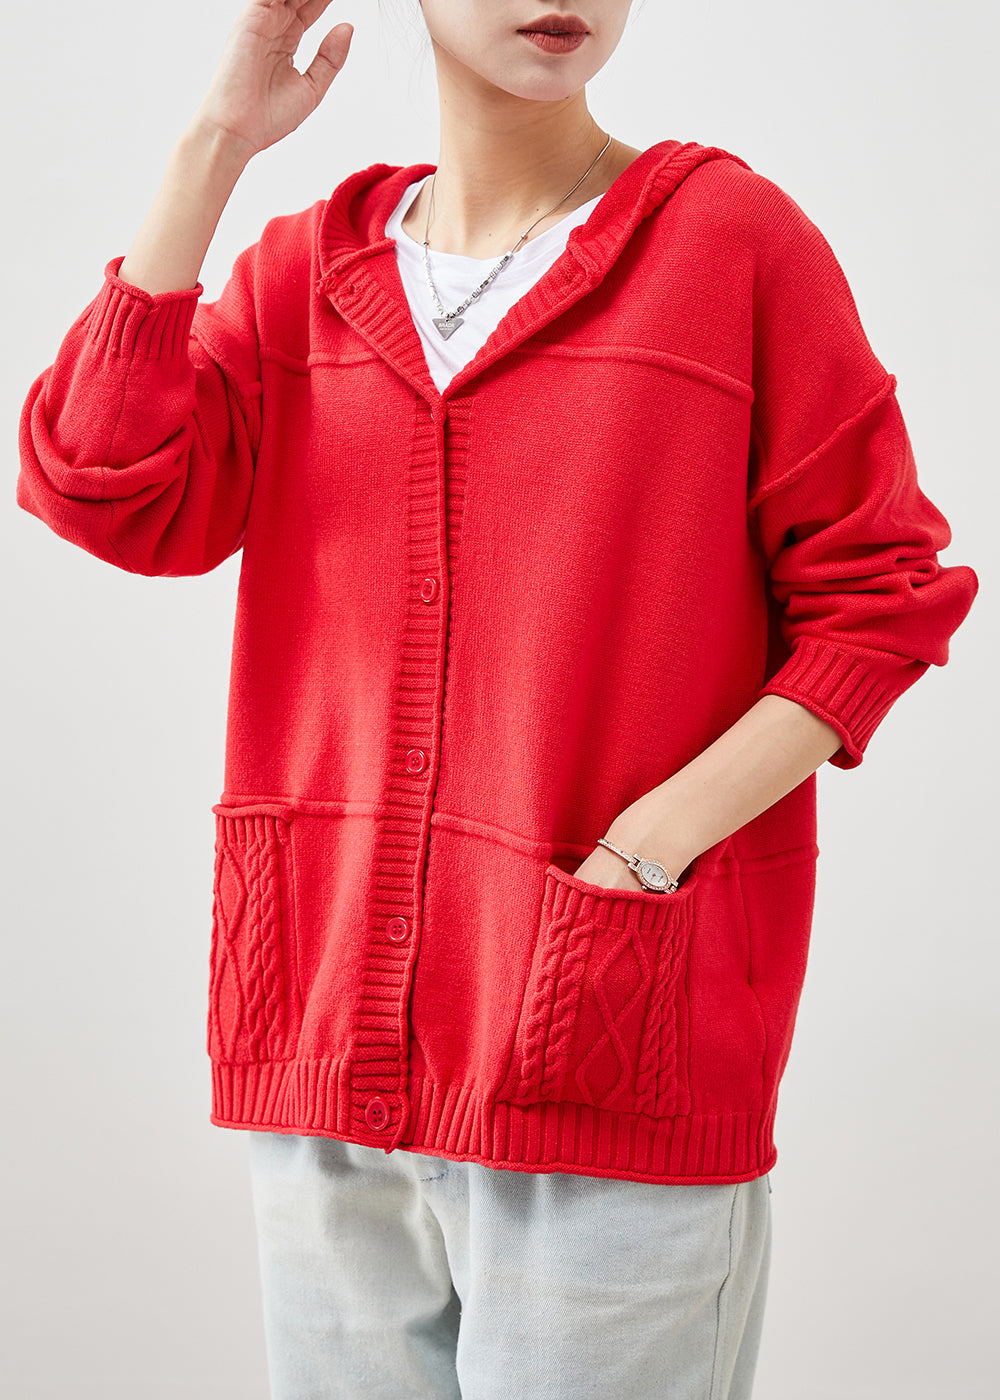 Stylish Red Hooded Pockets Knit Cardigans Spring